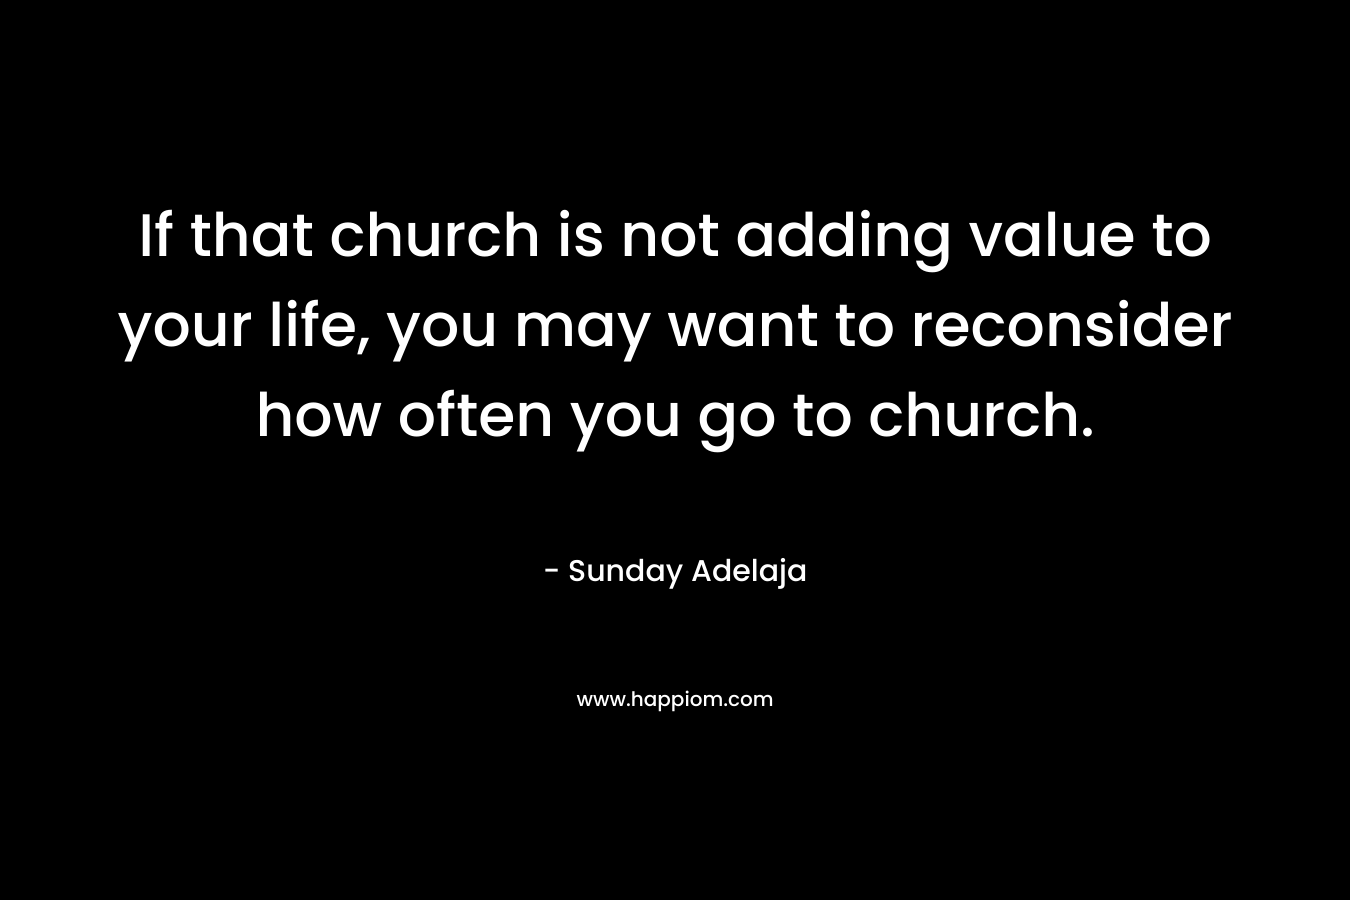 If that church is not adding value to your life, you may want to reconsider how often you go to church.